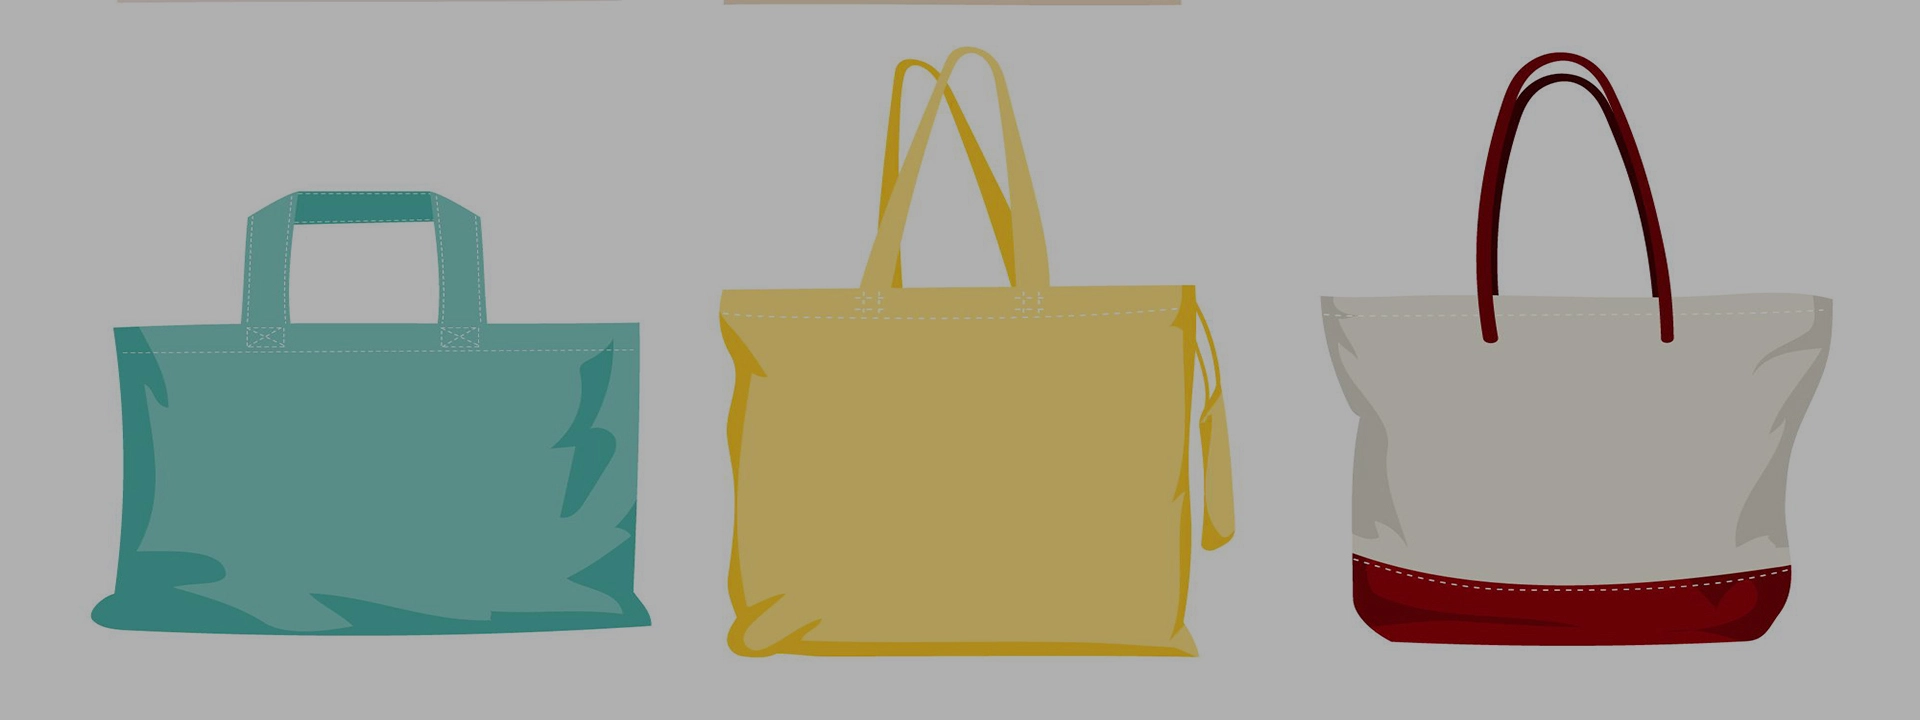 Consumer Experiences with Soft Canvas Shoulder Bags